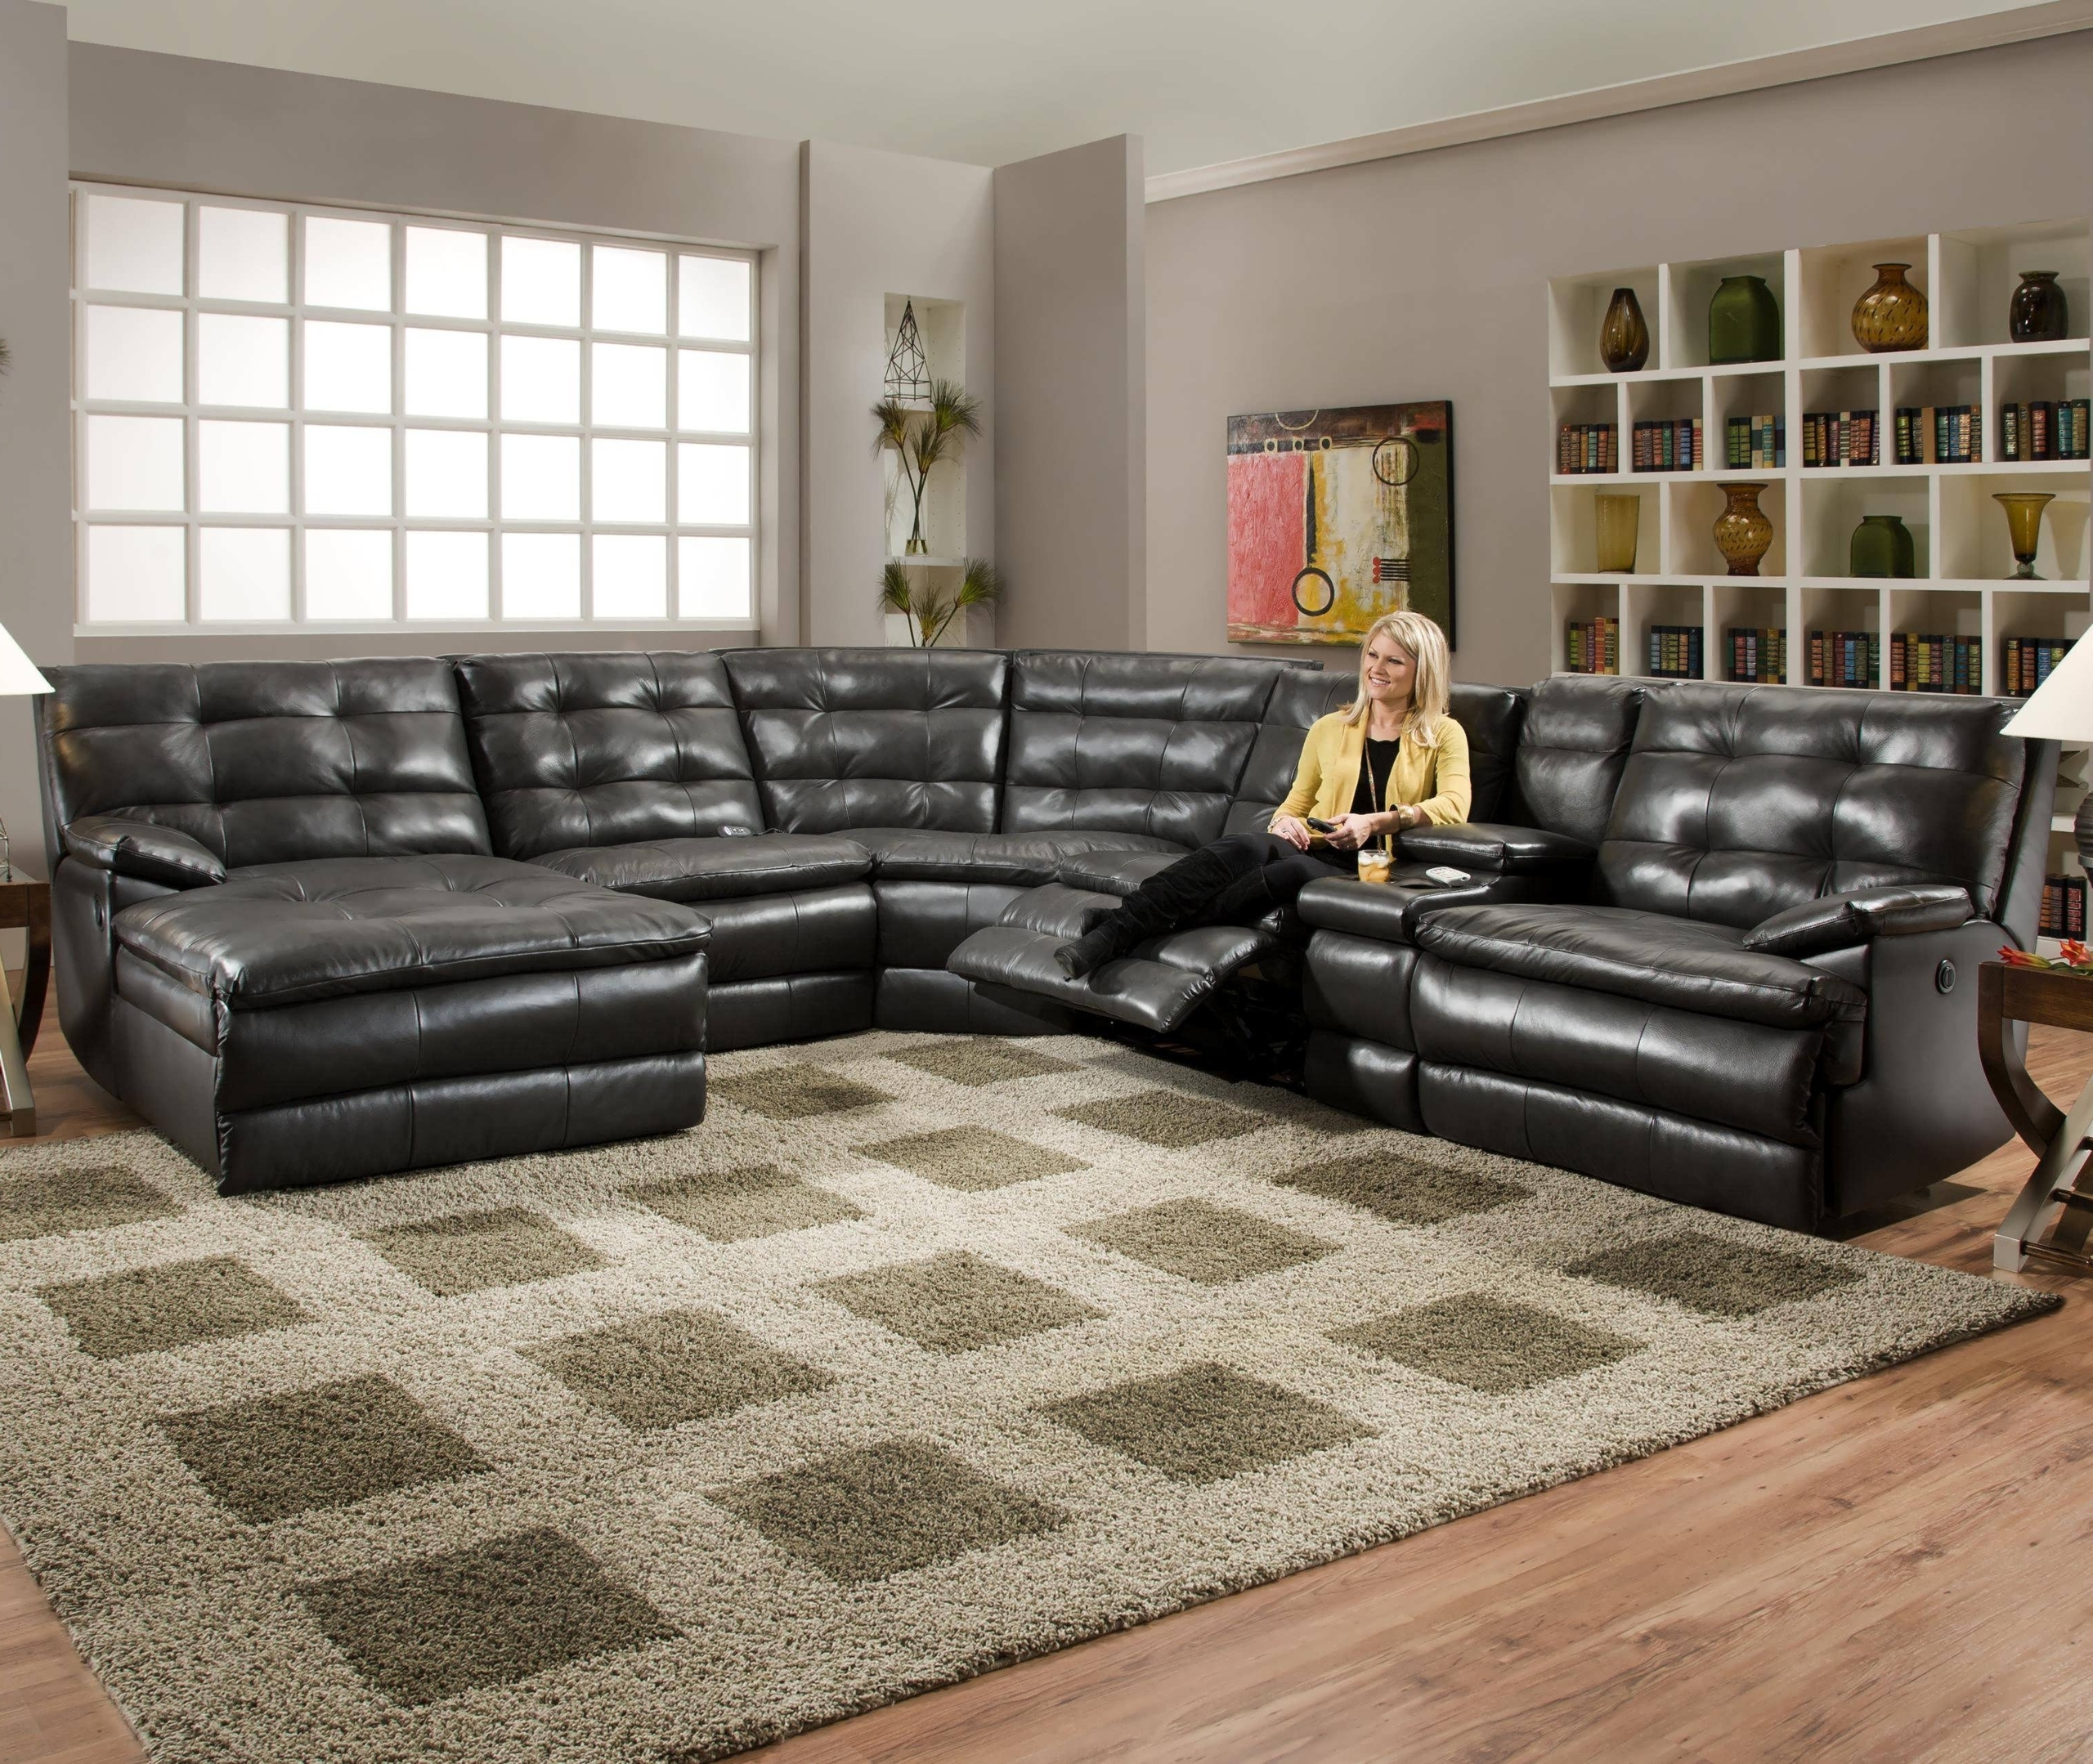 Extra Large Sectional Sofa Visualhunt, Large Leather Sectional With Chaise